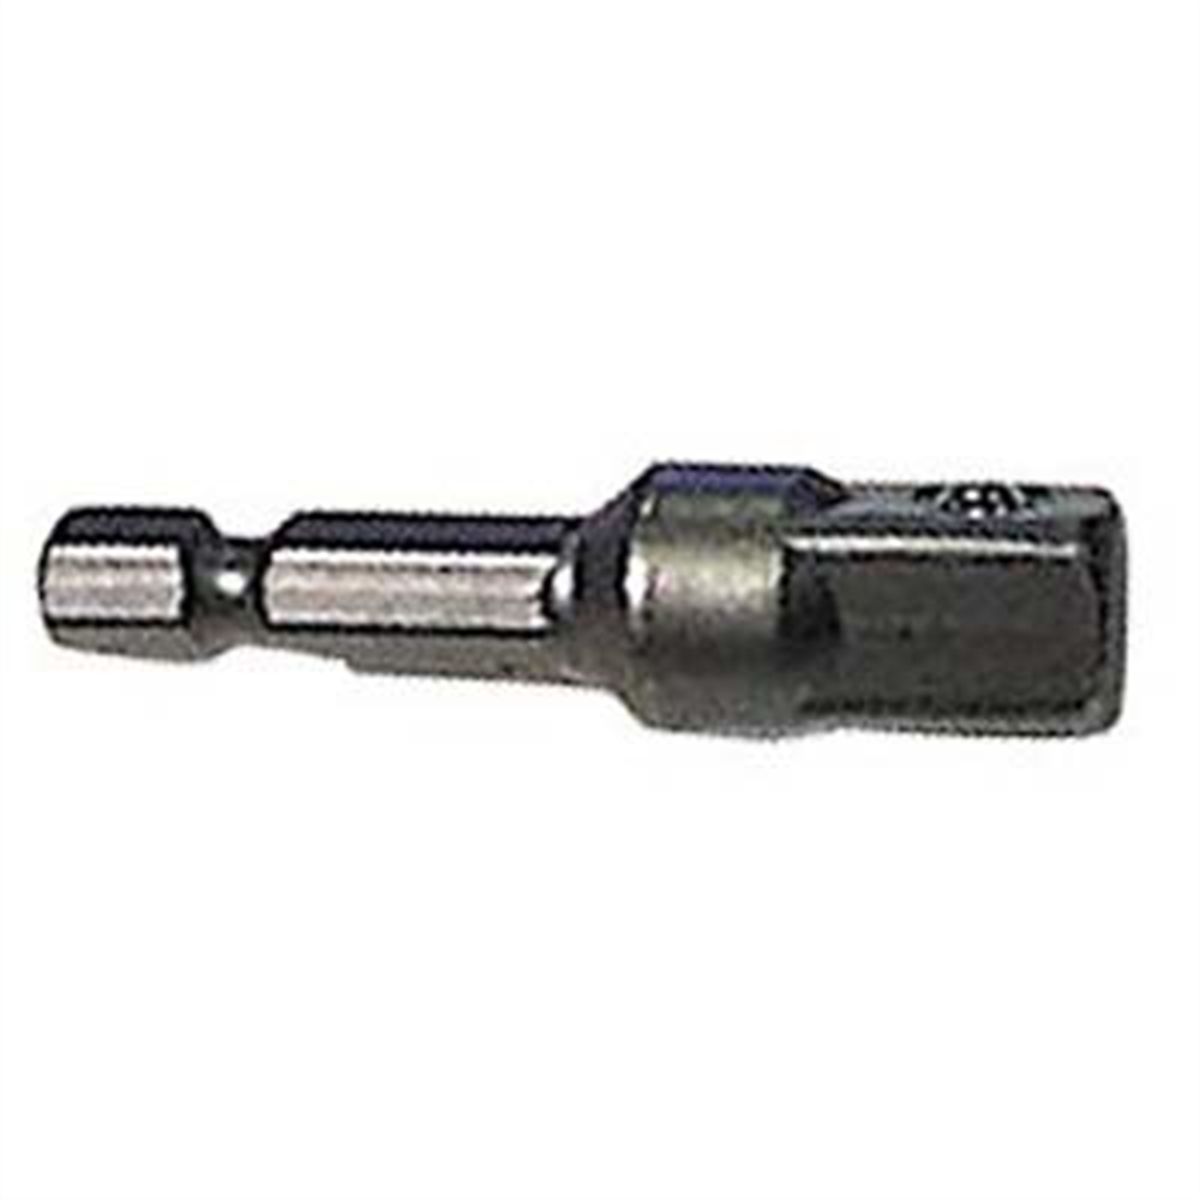 Cordless Drill Hex to Square Adapter - 3/8 In